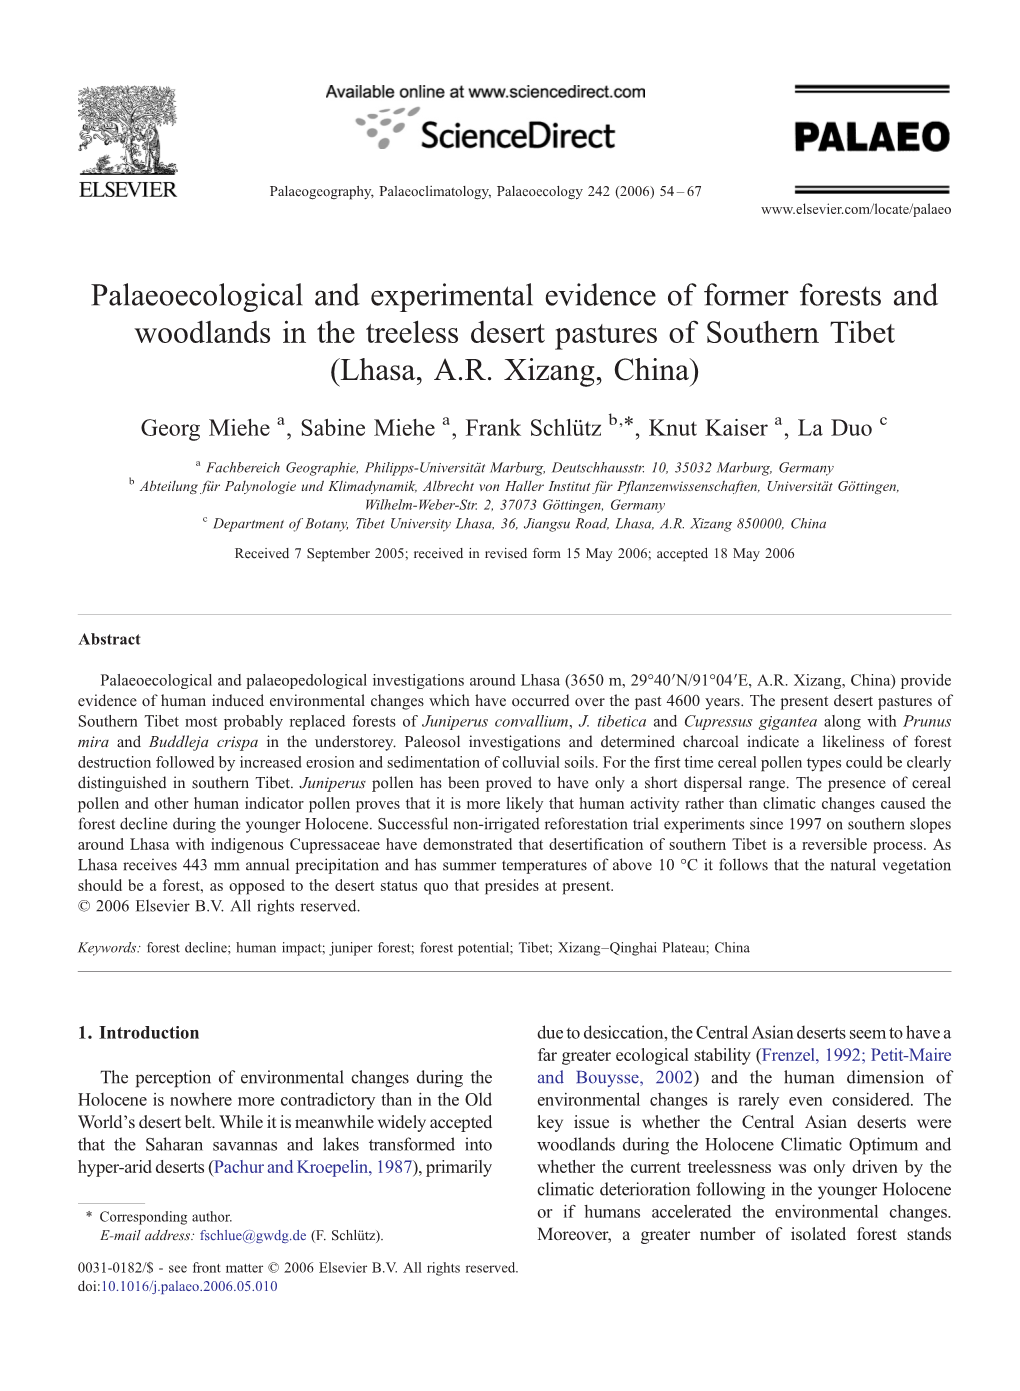 Palaeoecological and Experimental Evidence of Former Forests and Woodlands in the Treeless Desert Pastures of Southern Tibet (Lhasa, A.R